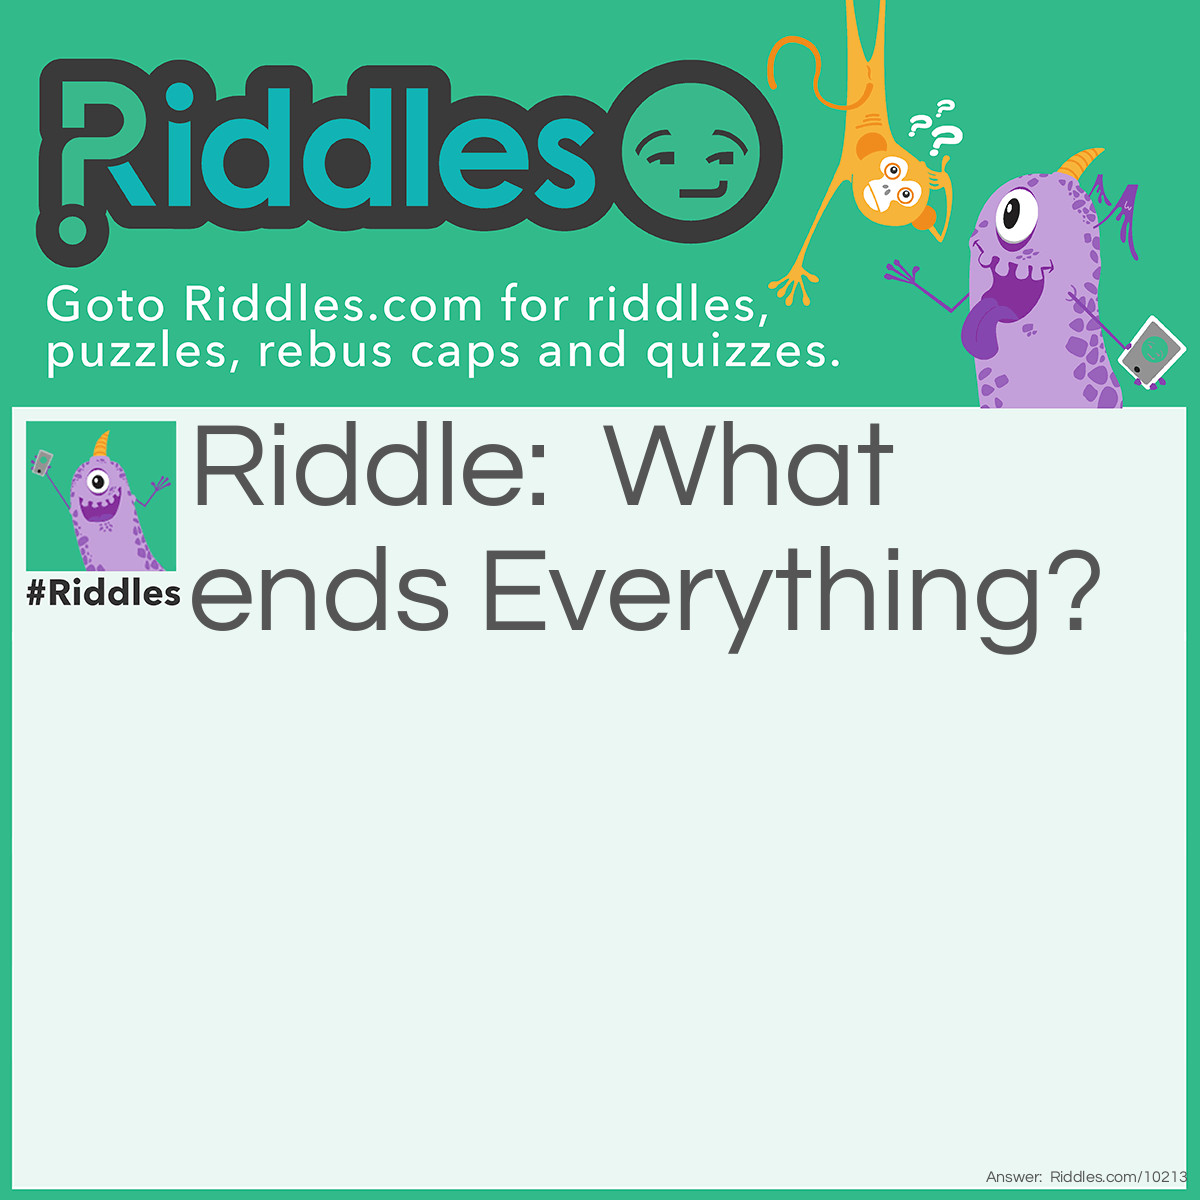 Riddle: What ends Everything? Answer: Letter G.